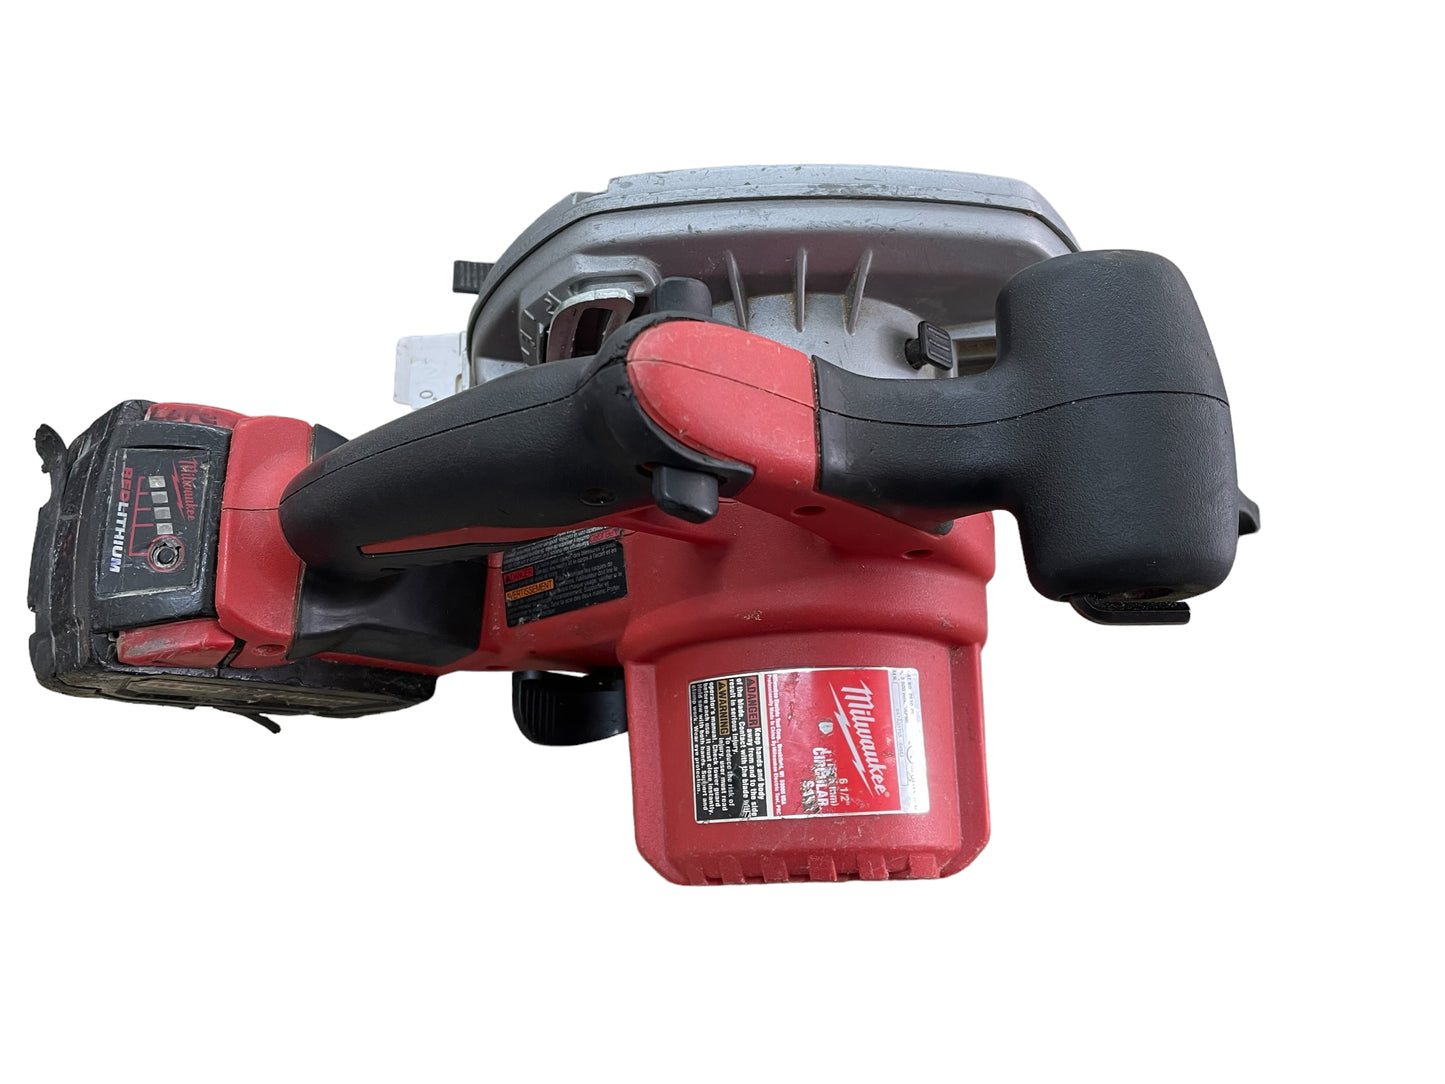 Milwaukee 2630-20 M18 18V Cordless 6-1/2 Inch Cordless Circular Saw (Local Pick-up only)